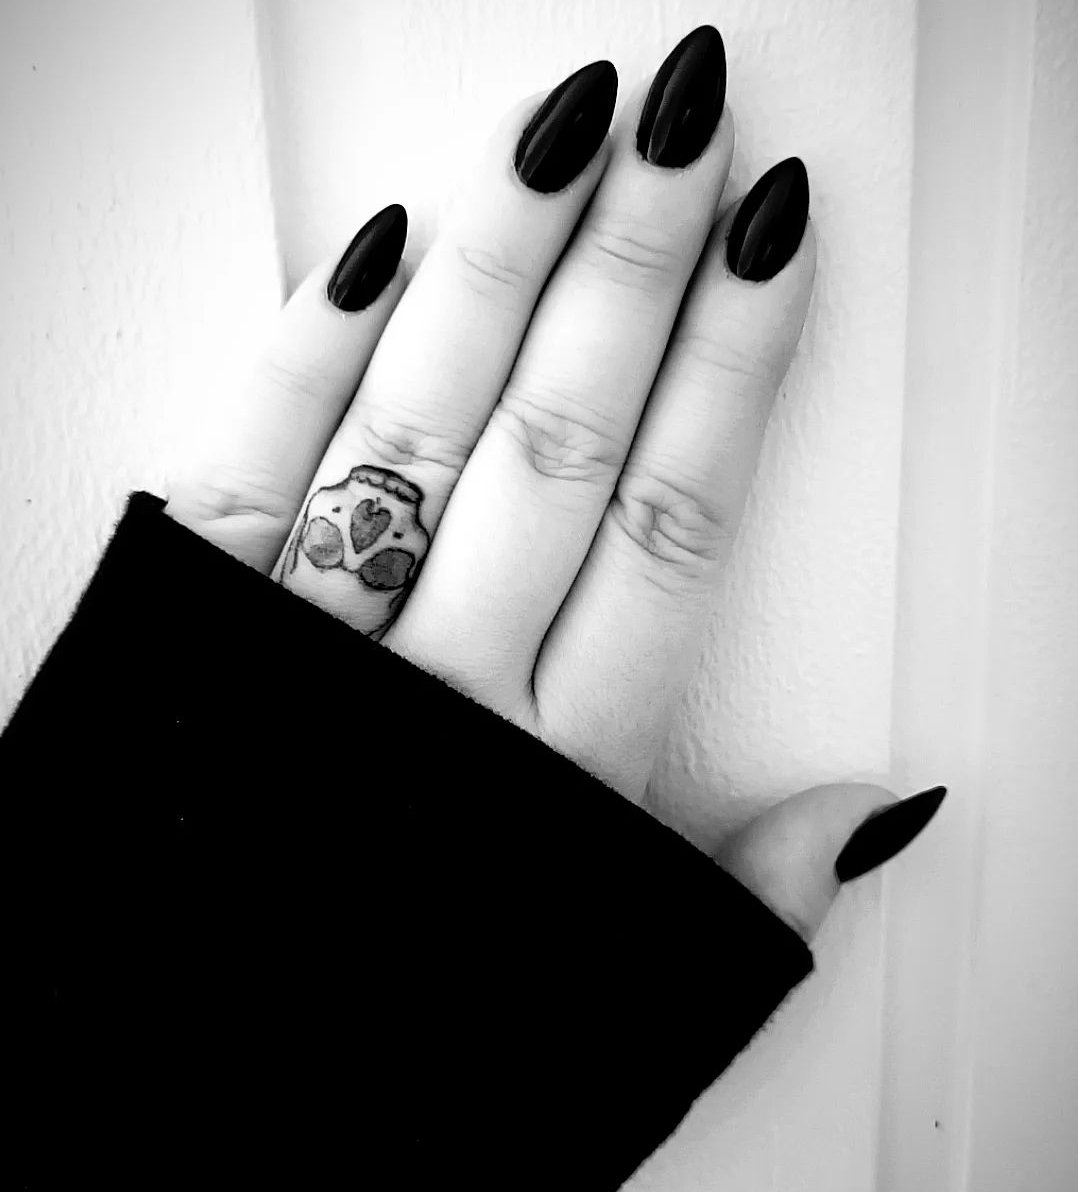 Other women: wearing spring/summer clothes and getting their sparkly, bright coloured manicures. Me: Nope... 💅💀🖤 #black #manicure #fvckthesummer